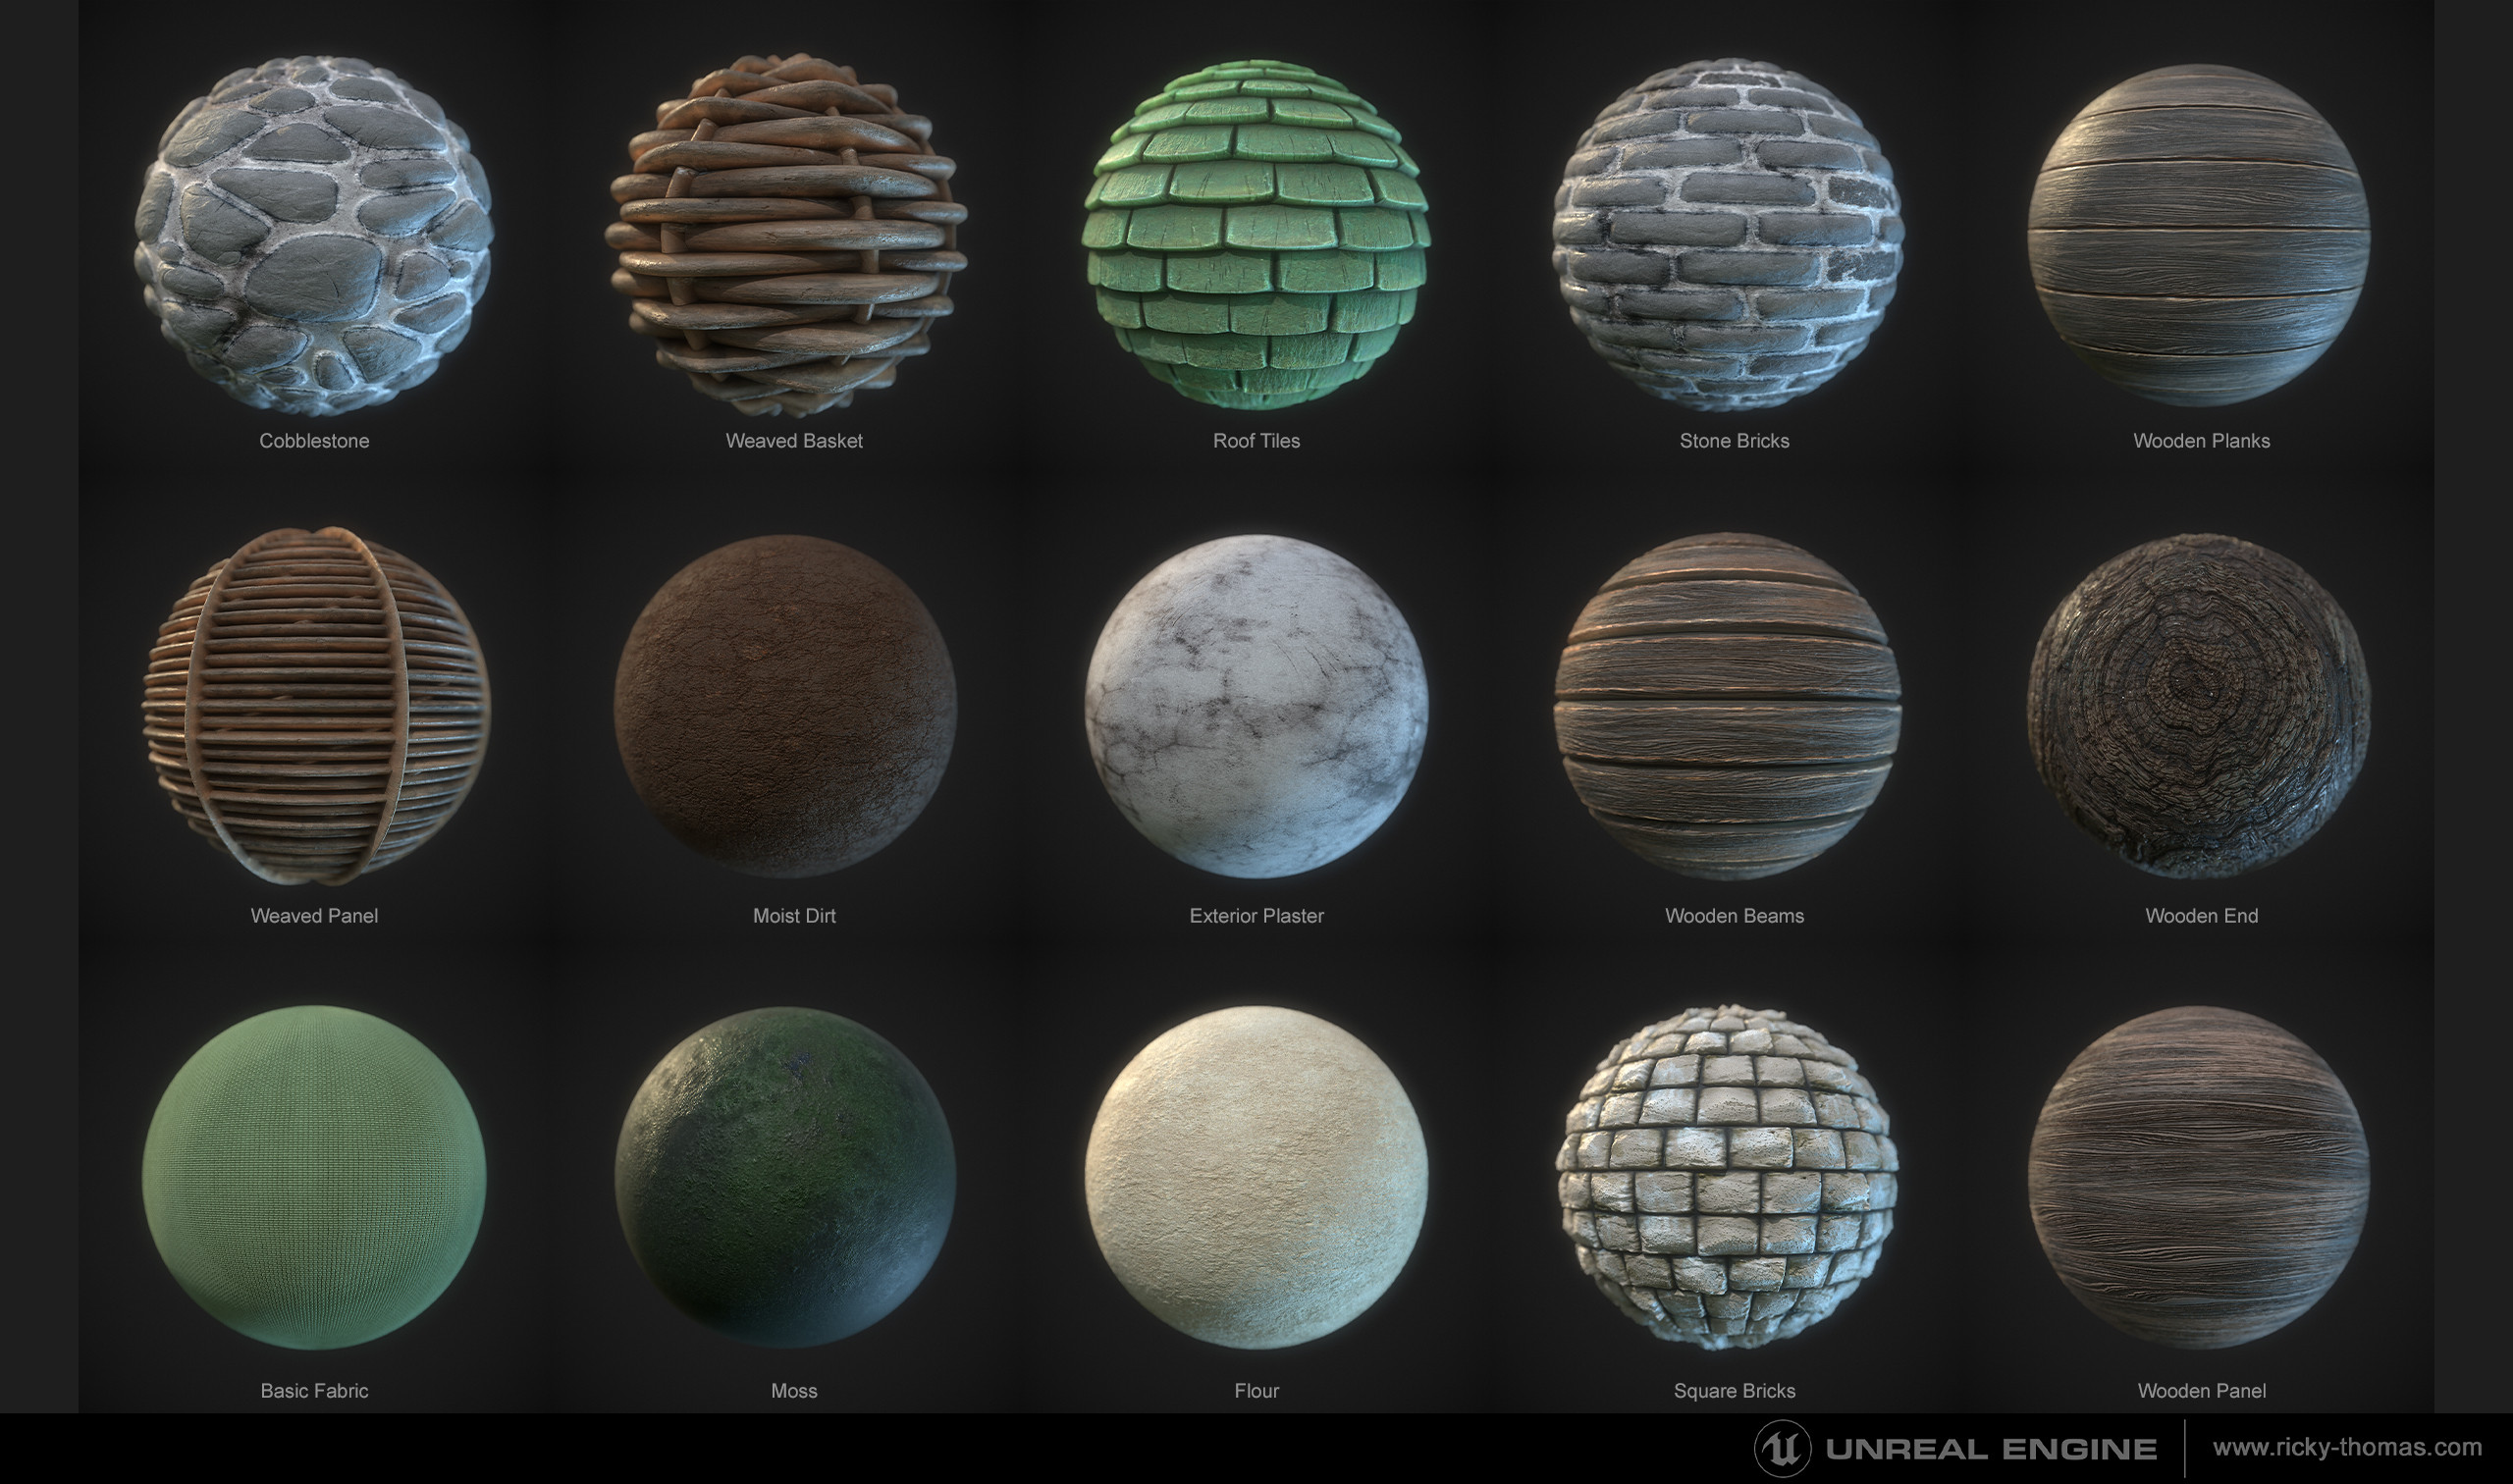 Some materials created in Substance Designer for the project.